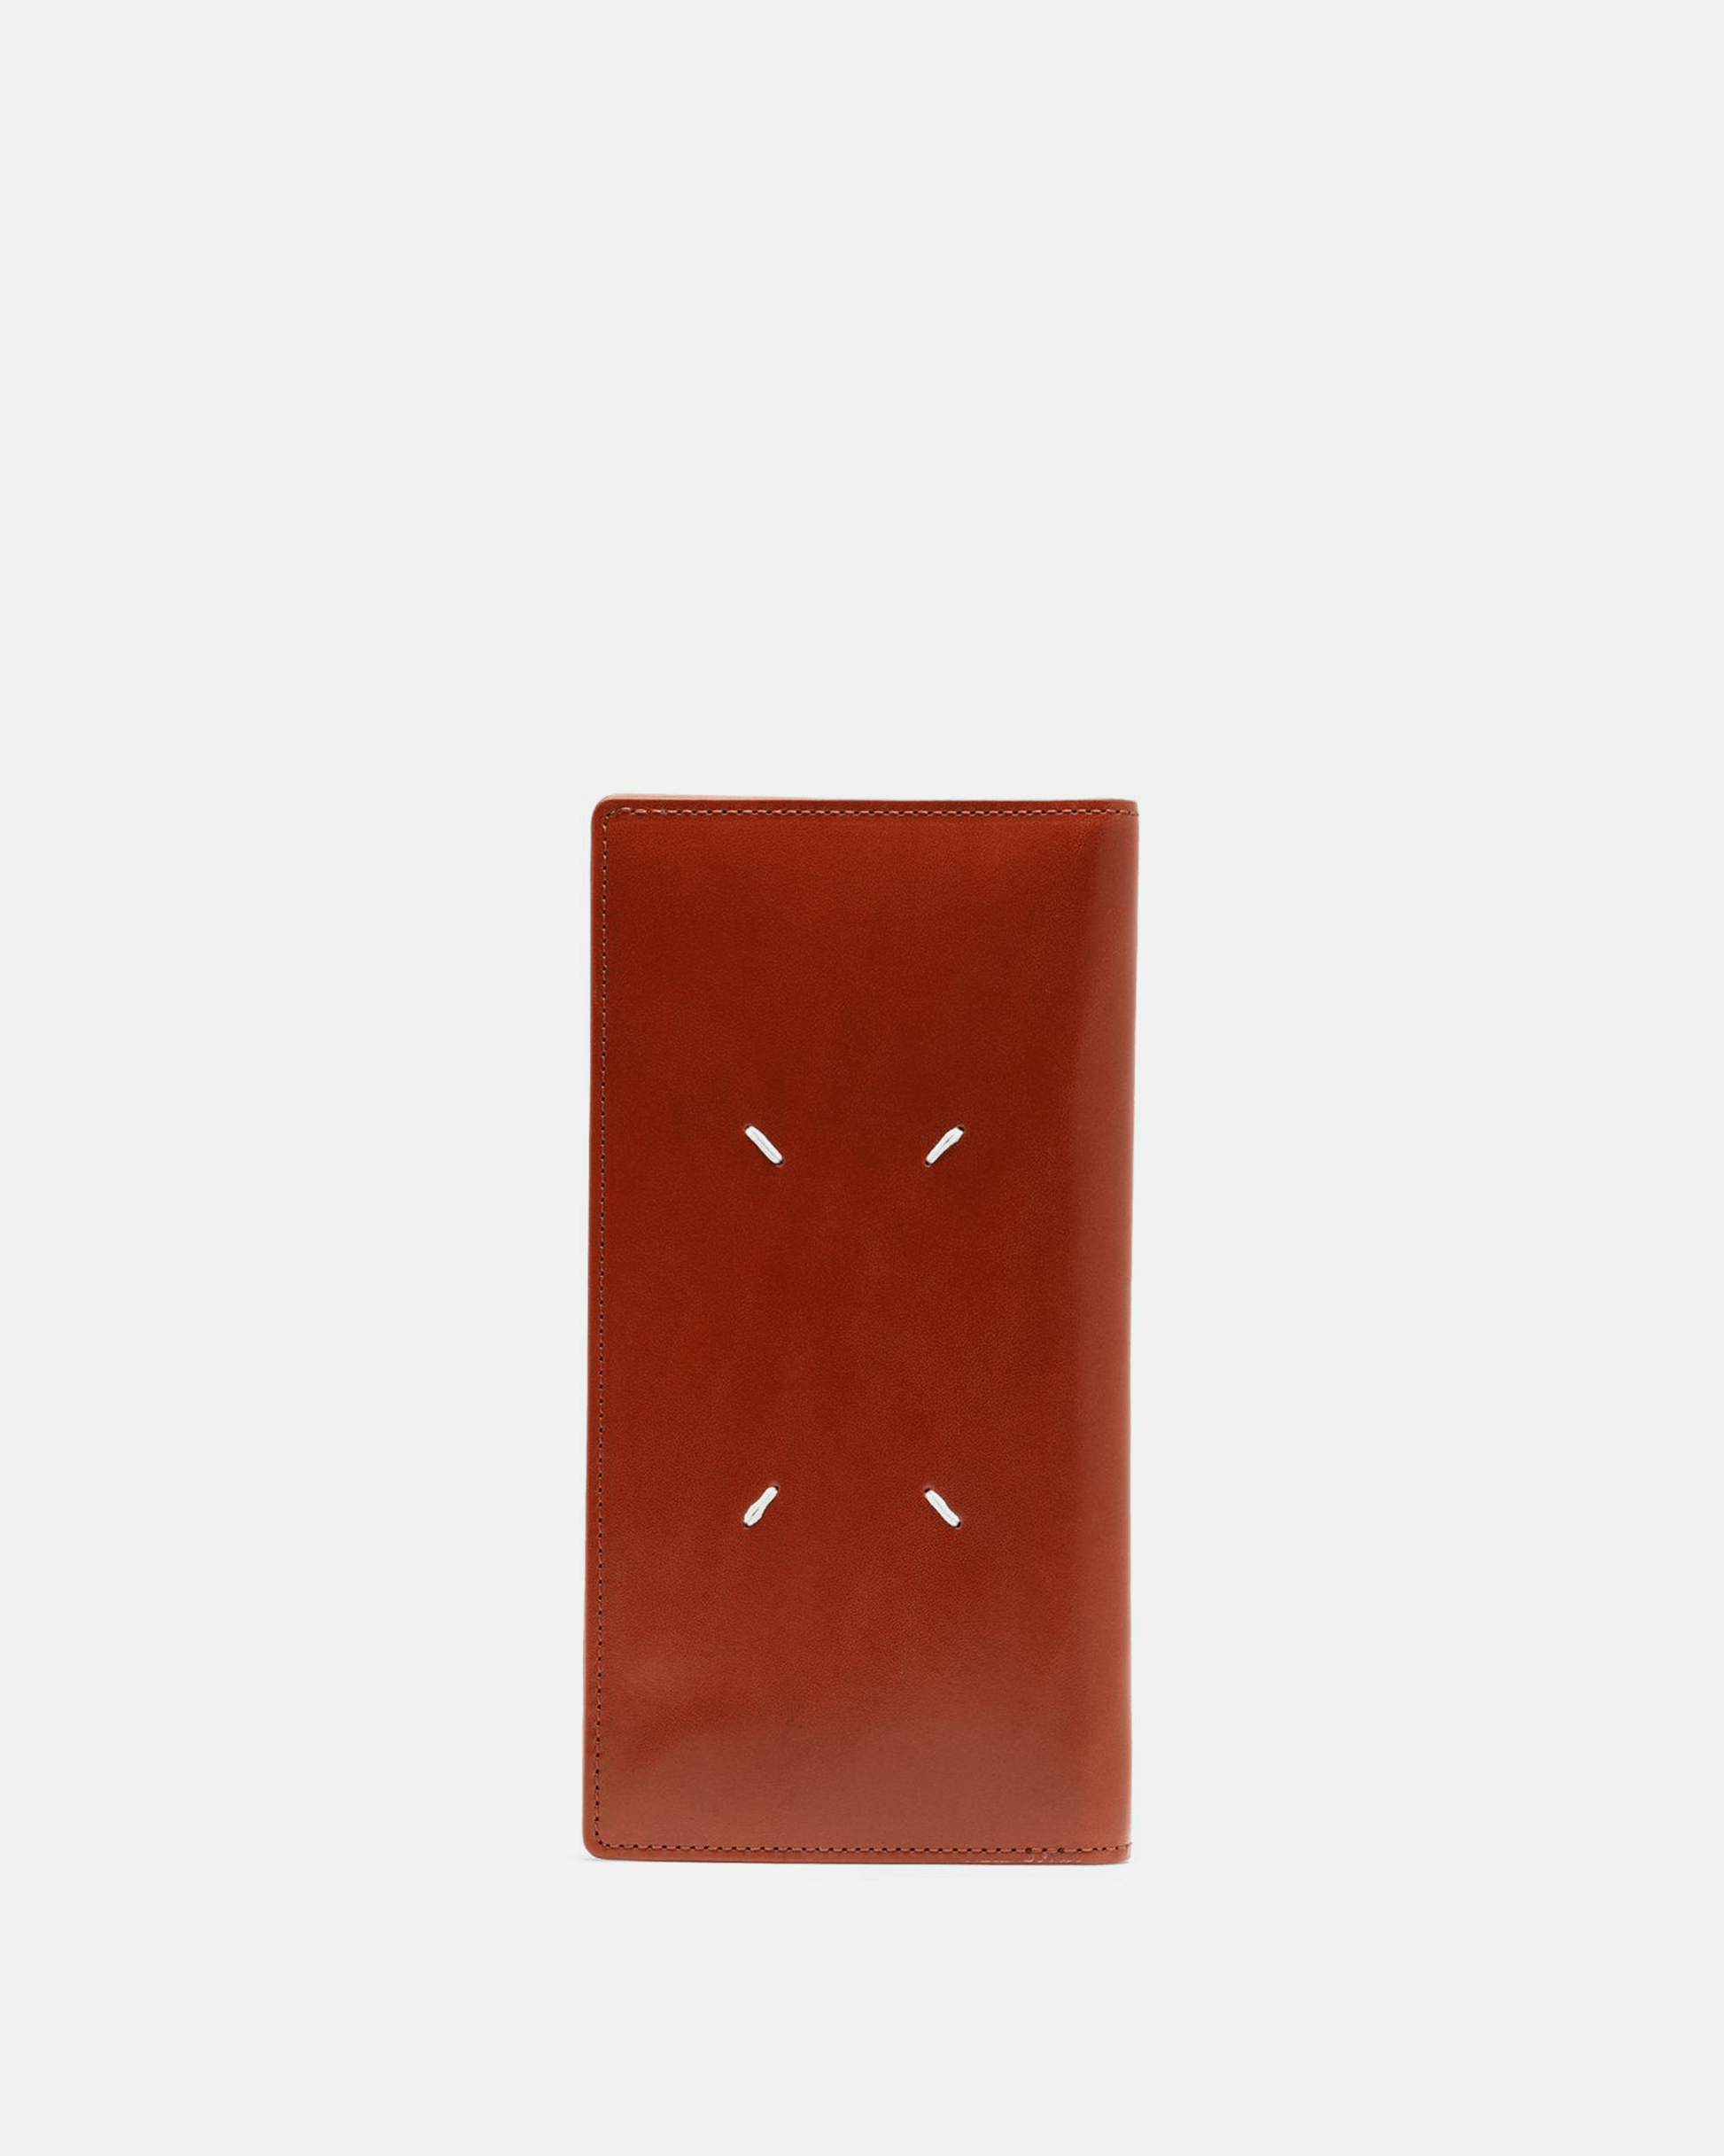 Maison Margiela Leather Goods MM.11 Travel Wallet in Brown